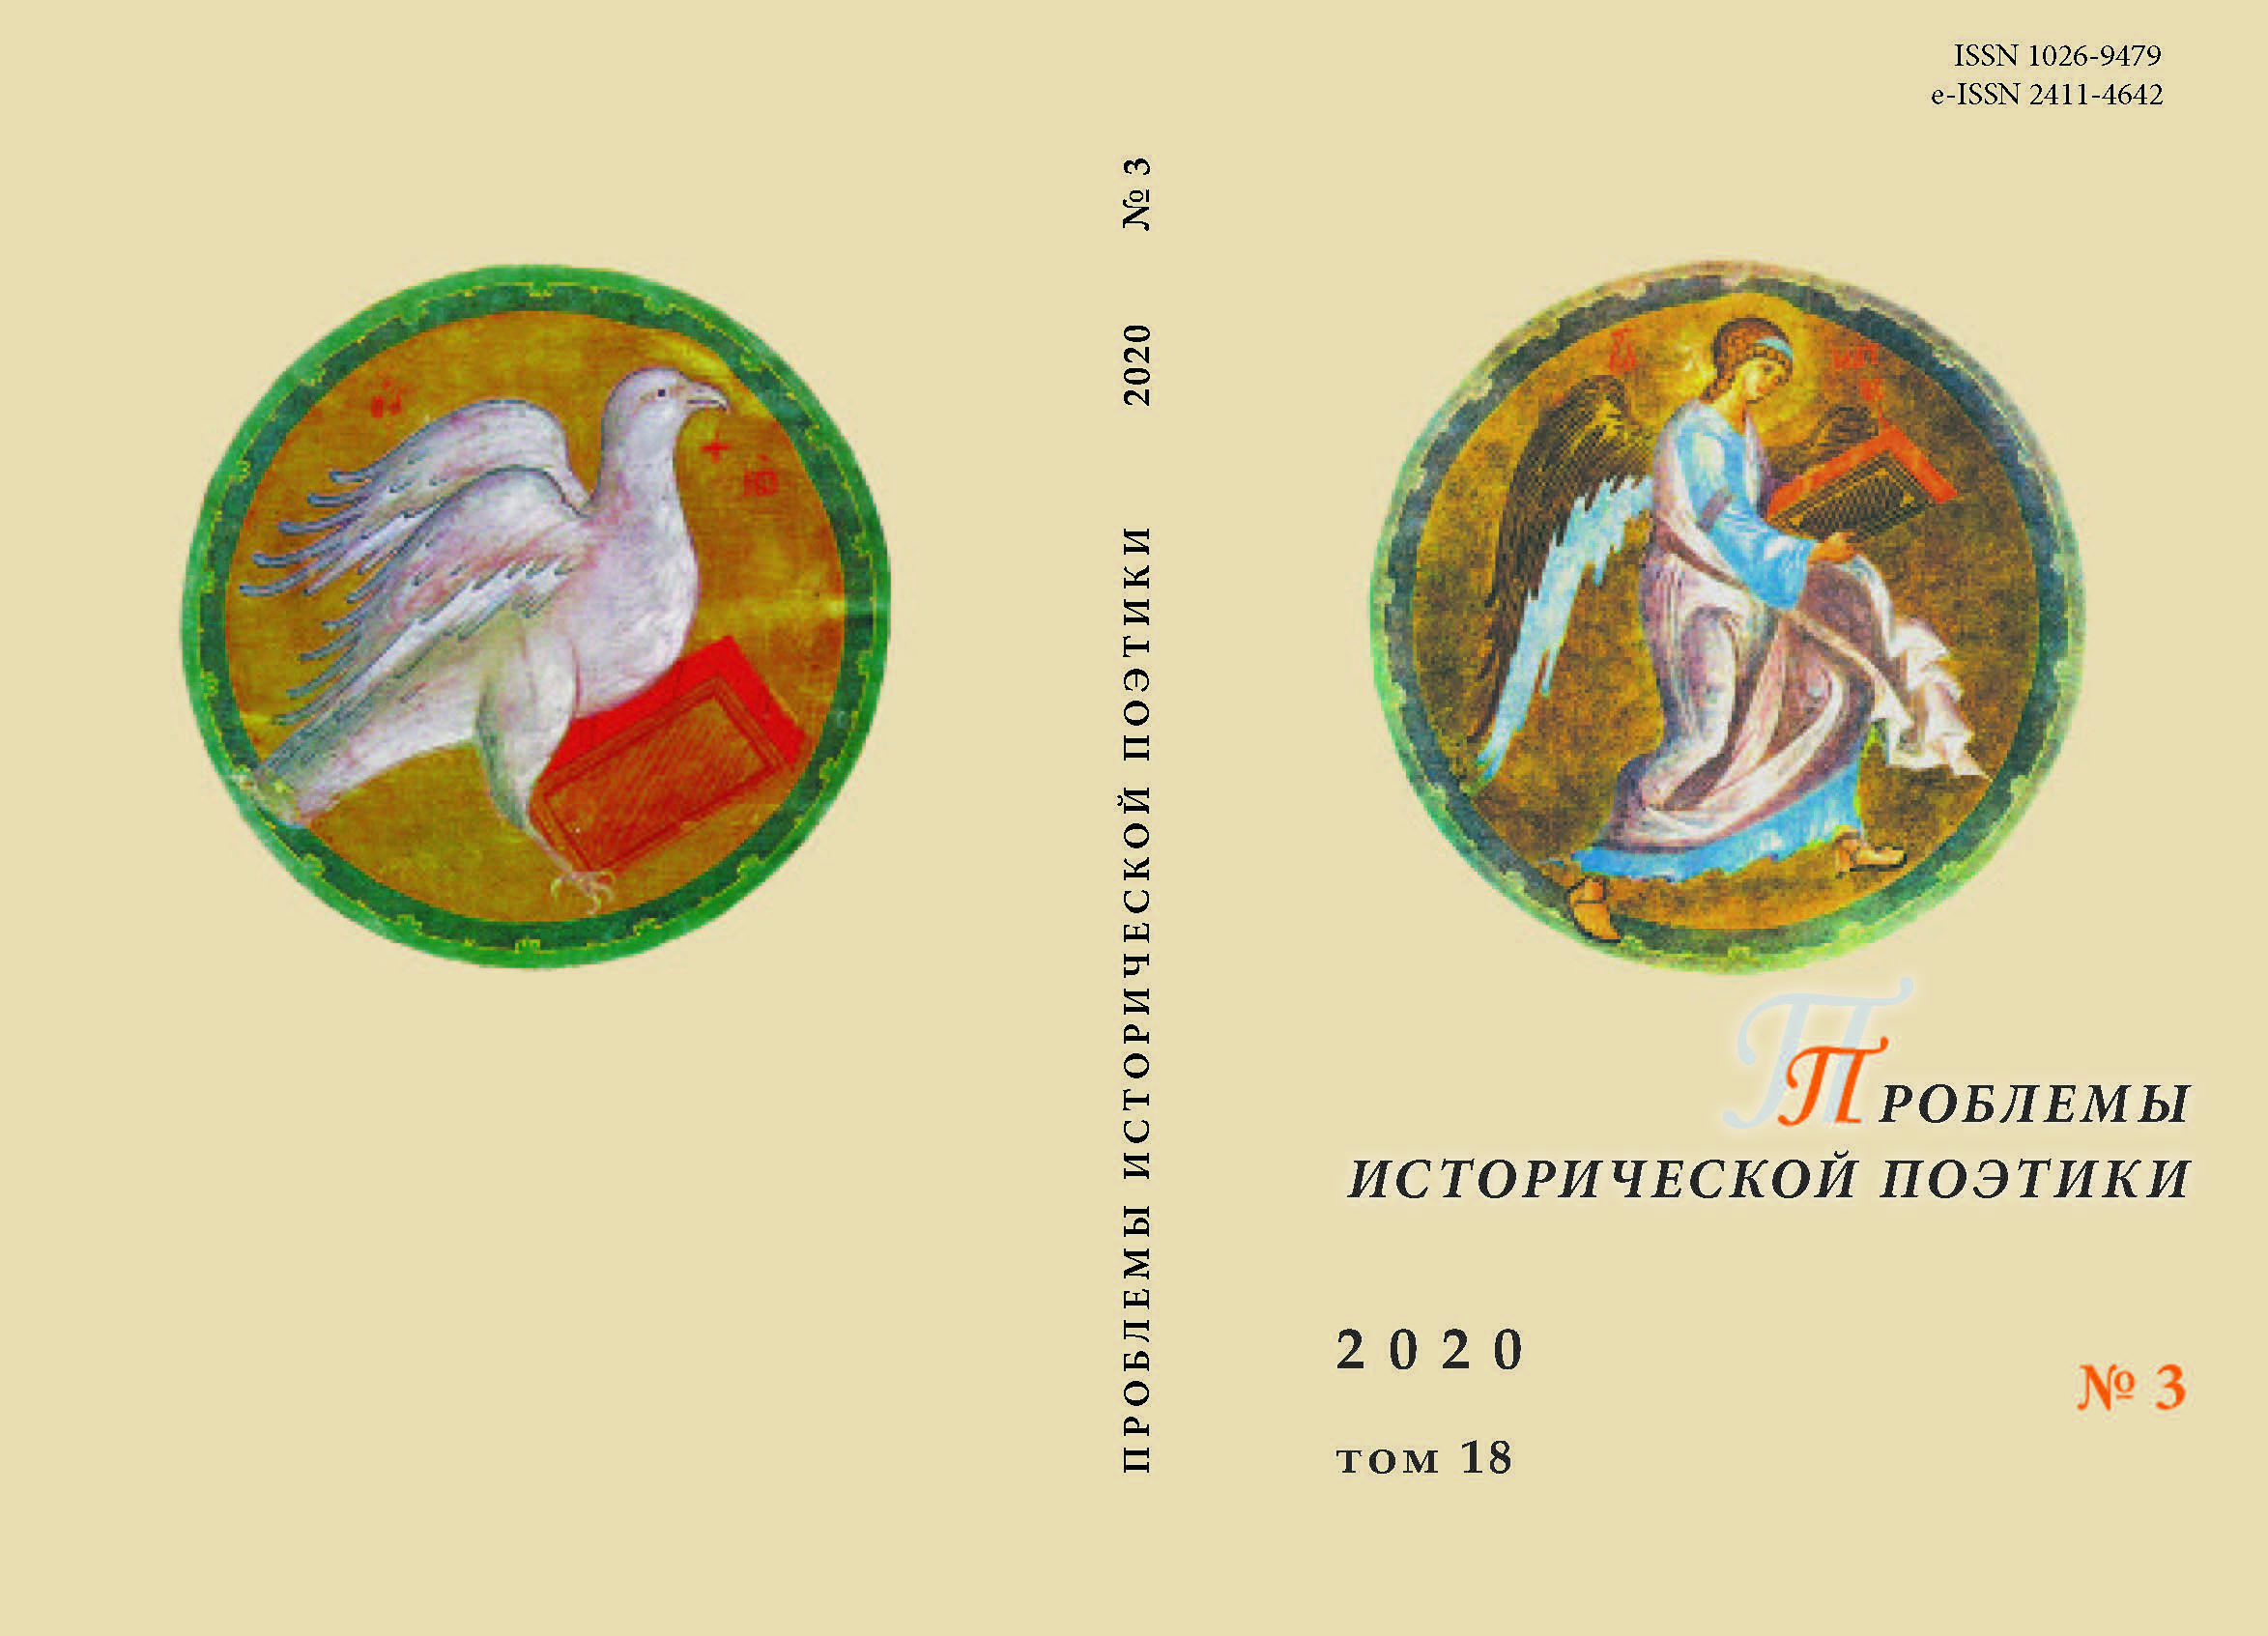 THE HEROIC CONFRONTATION STORYLINE IN RUSSIAN LITERATURE: FROM THE LEGEND OF THE SLAUGHTER OF MAMAI TO THE FATE OF A MAN BY MIKHAIL SHOLOKHOV Cover Image